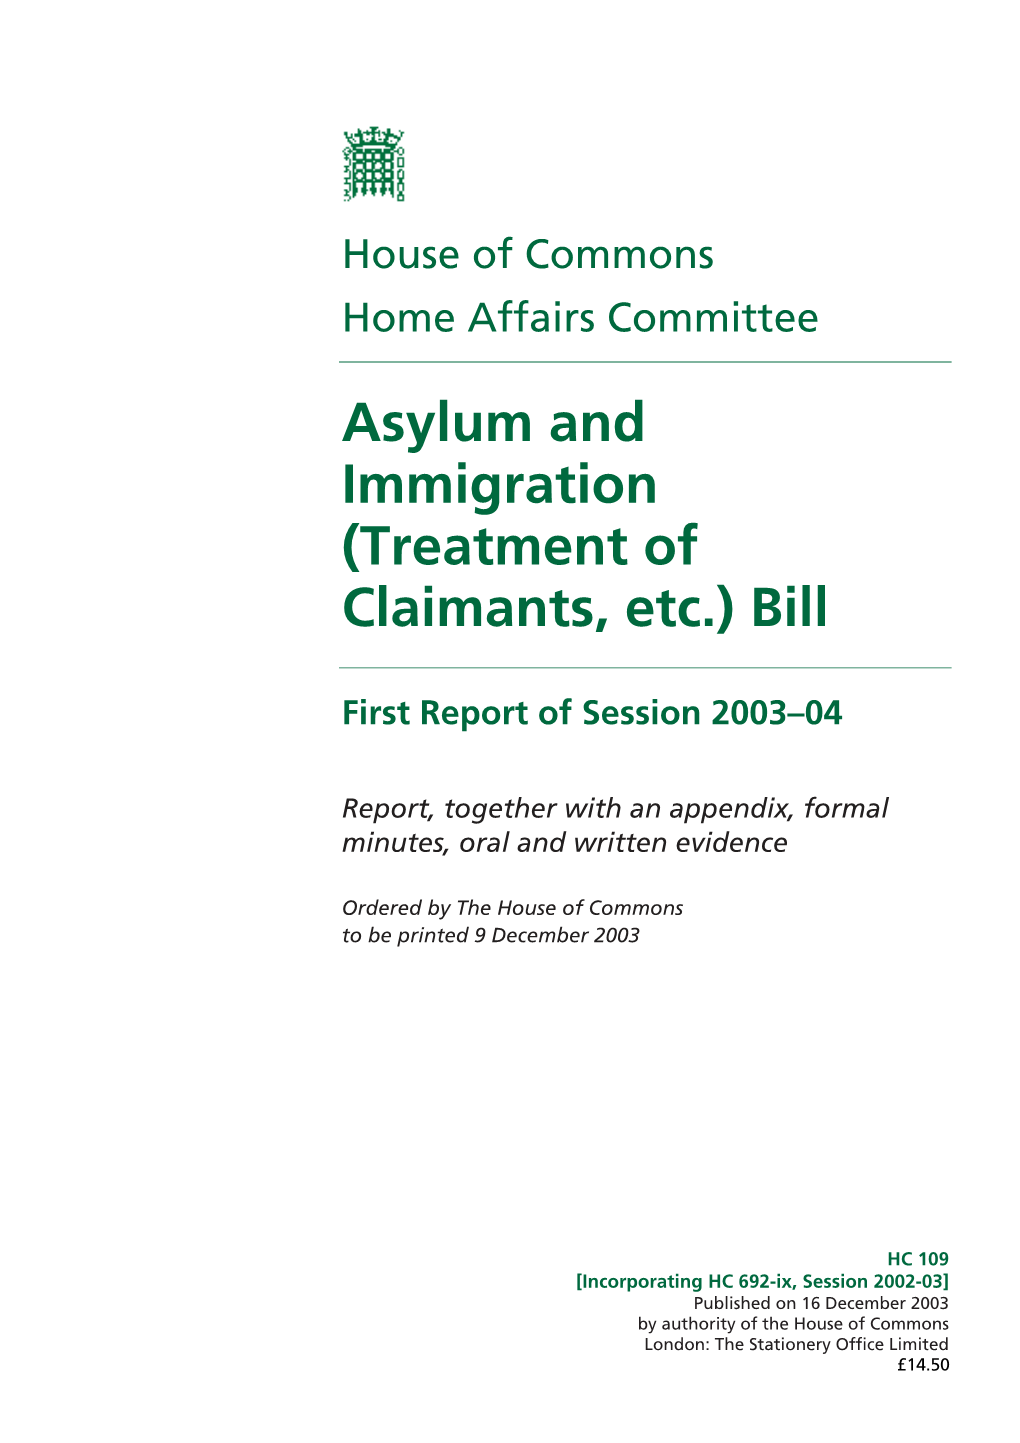 Asylum and Immigration (Treatment of Claimants, Etc.) Bill